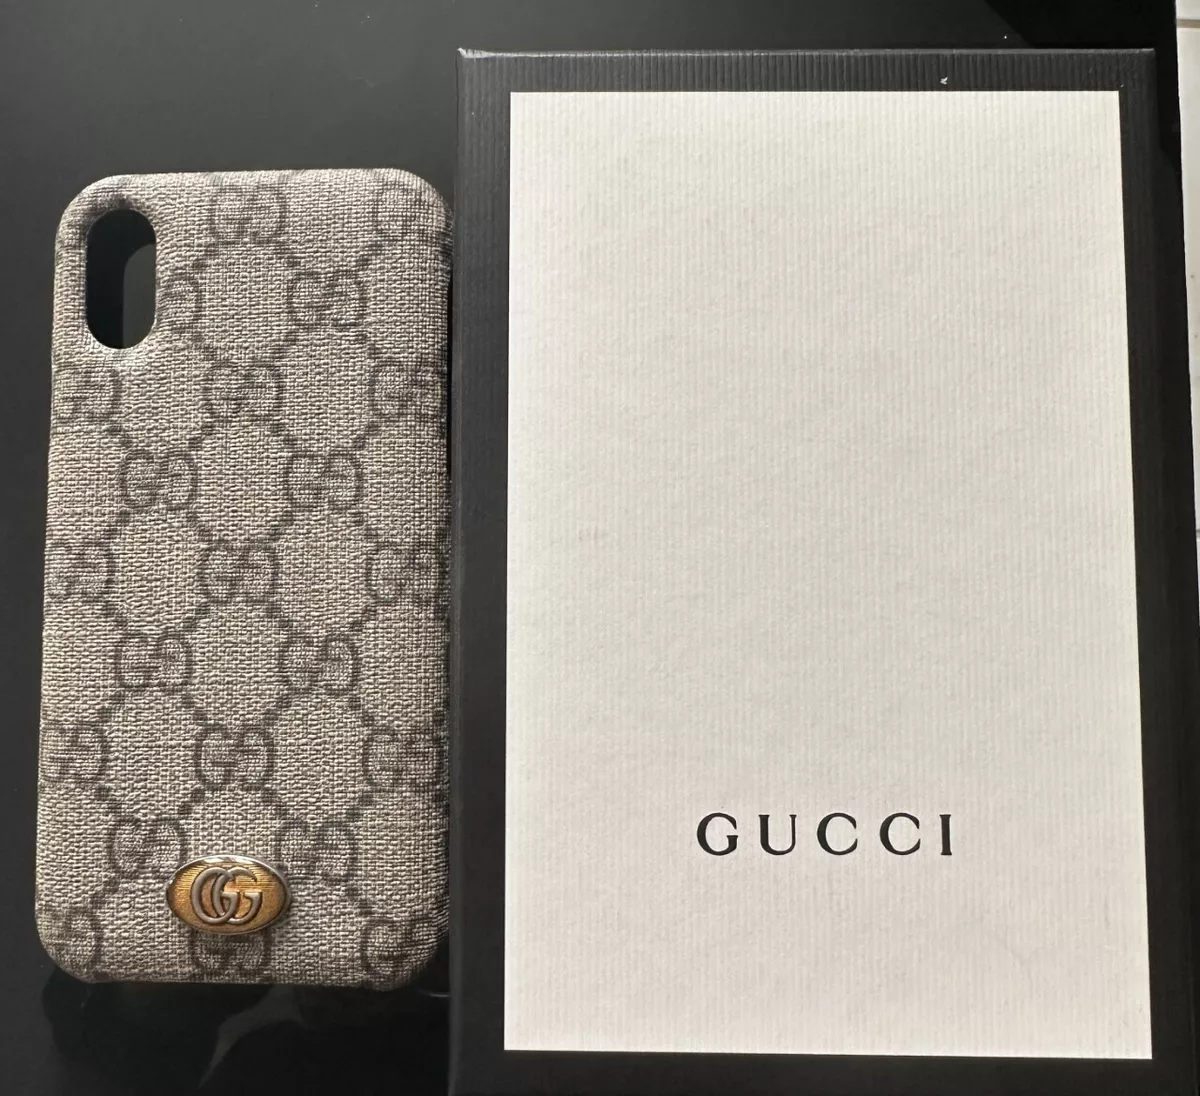 Gucci GG Iphone (no defects) | eBay